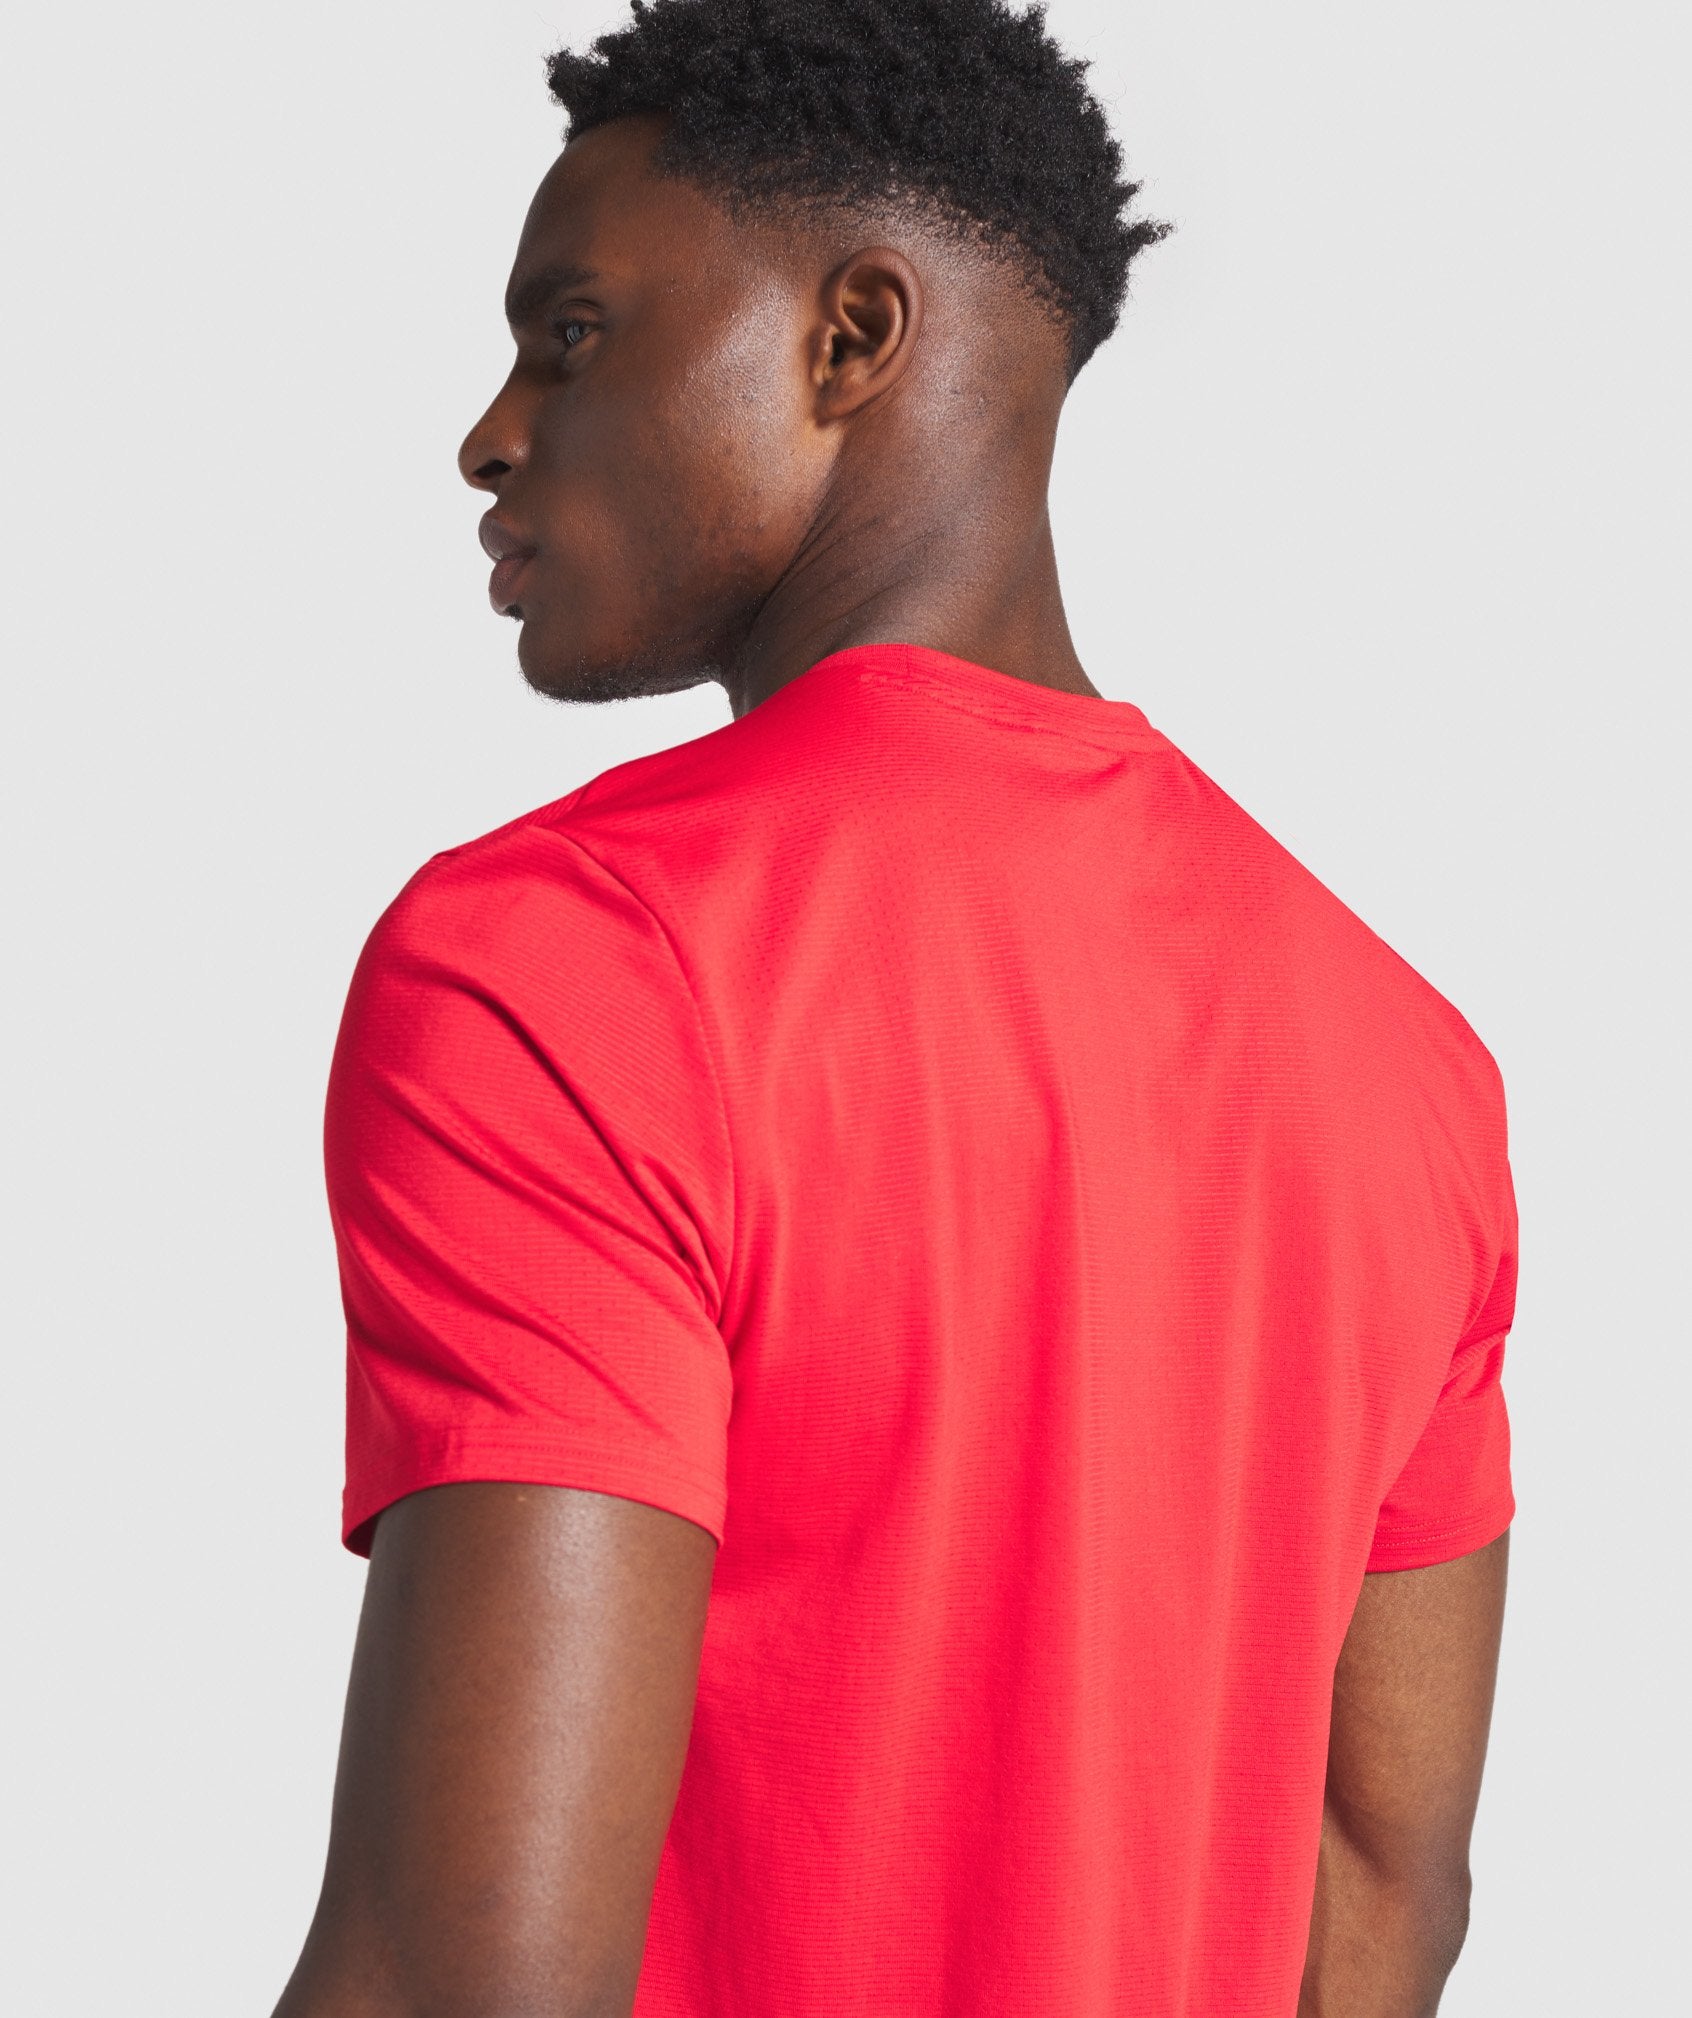 Arrival Graphic T-Shirt in Red